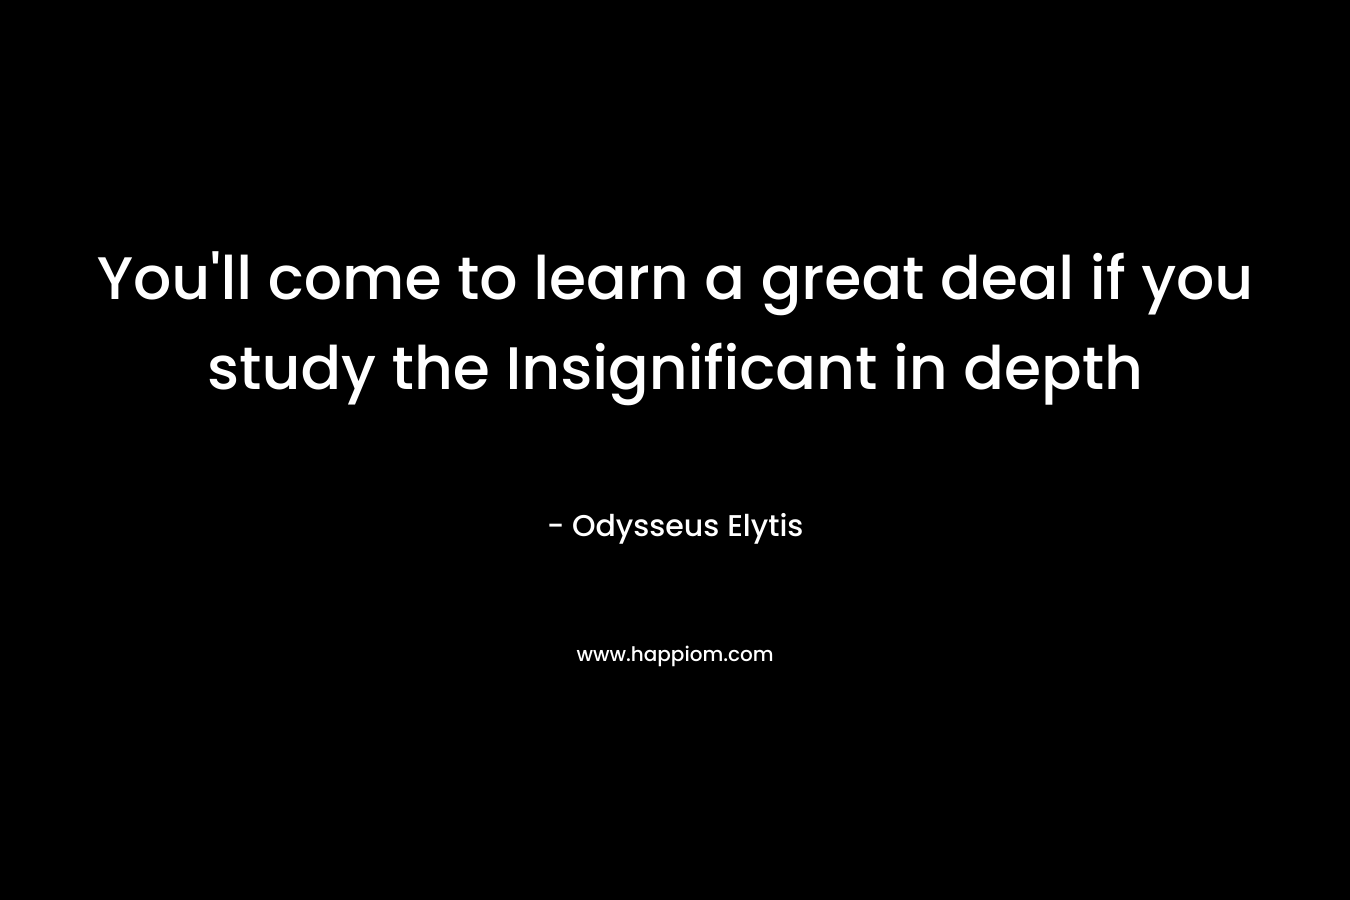 You’ll come to learn a great deal if you study the Insignificant in depth – Odysseus Elytis